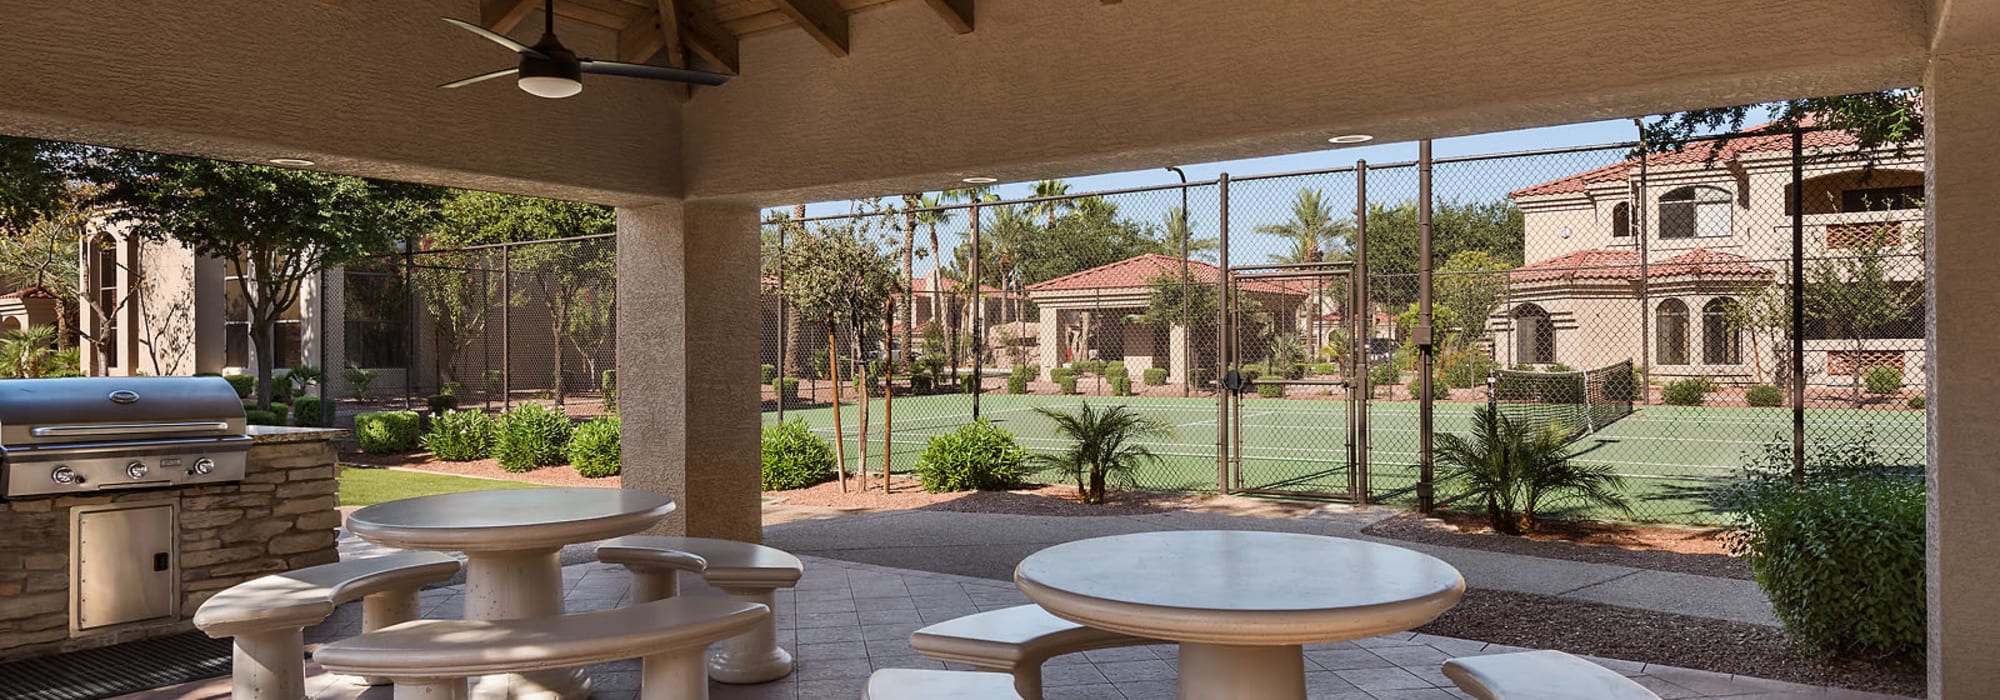 BBQ area and tennis court at San Cervantes in Chandler, Arizona